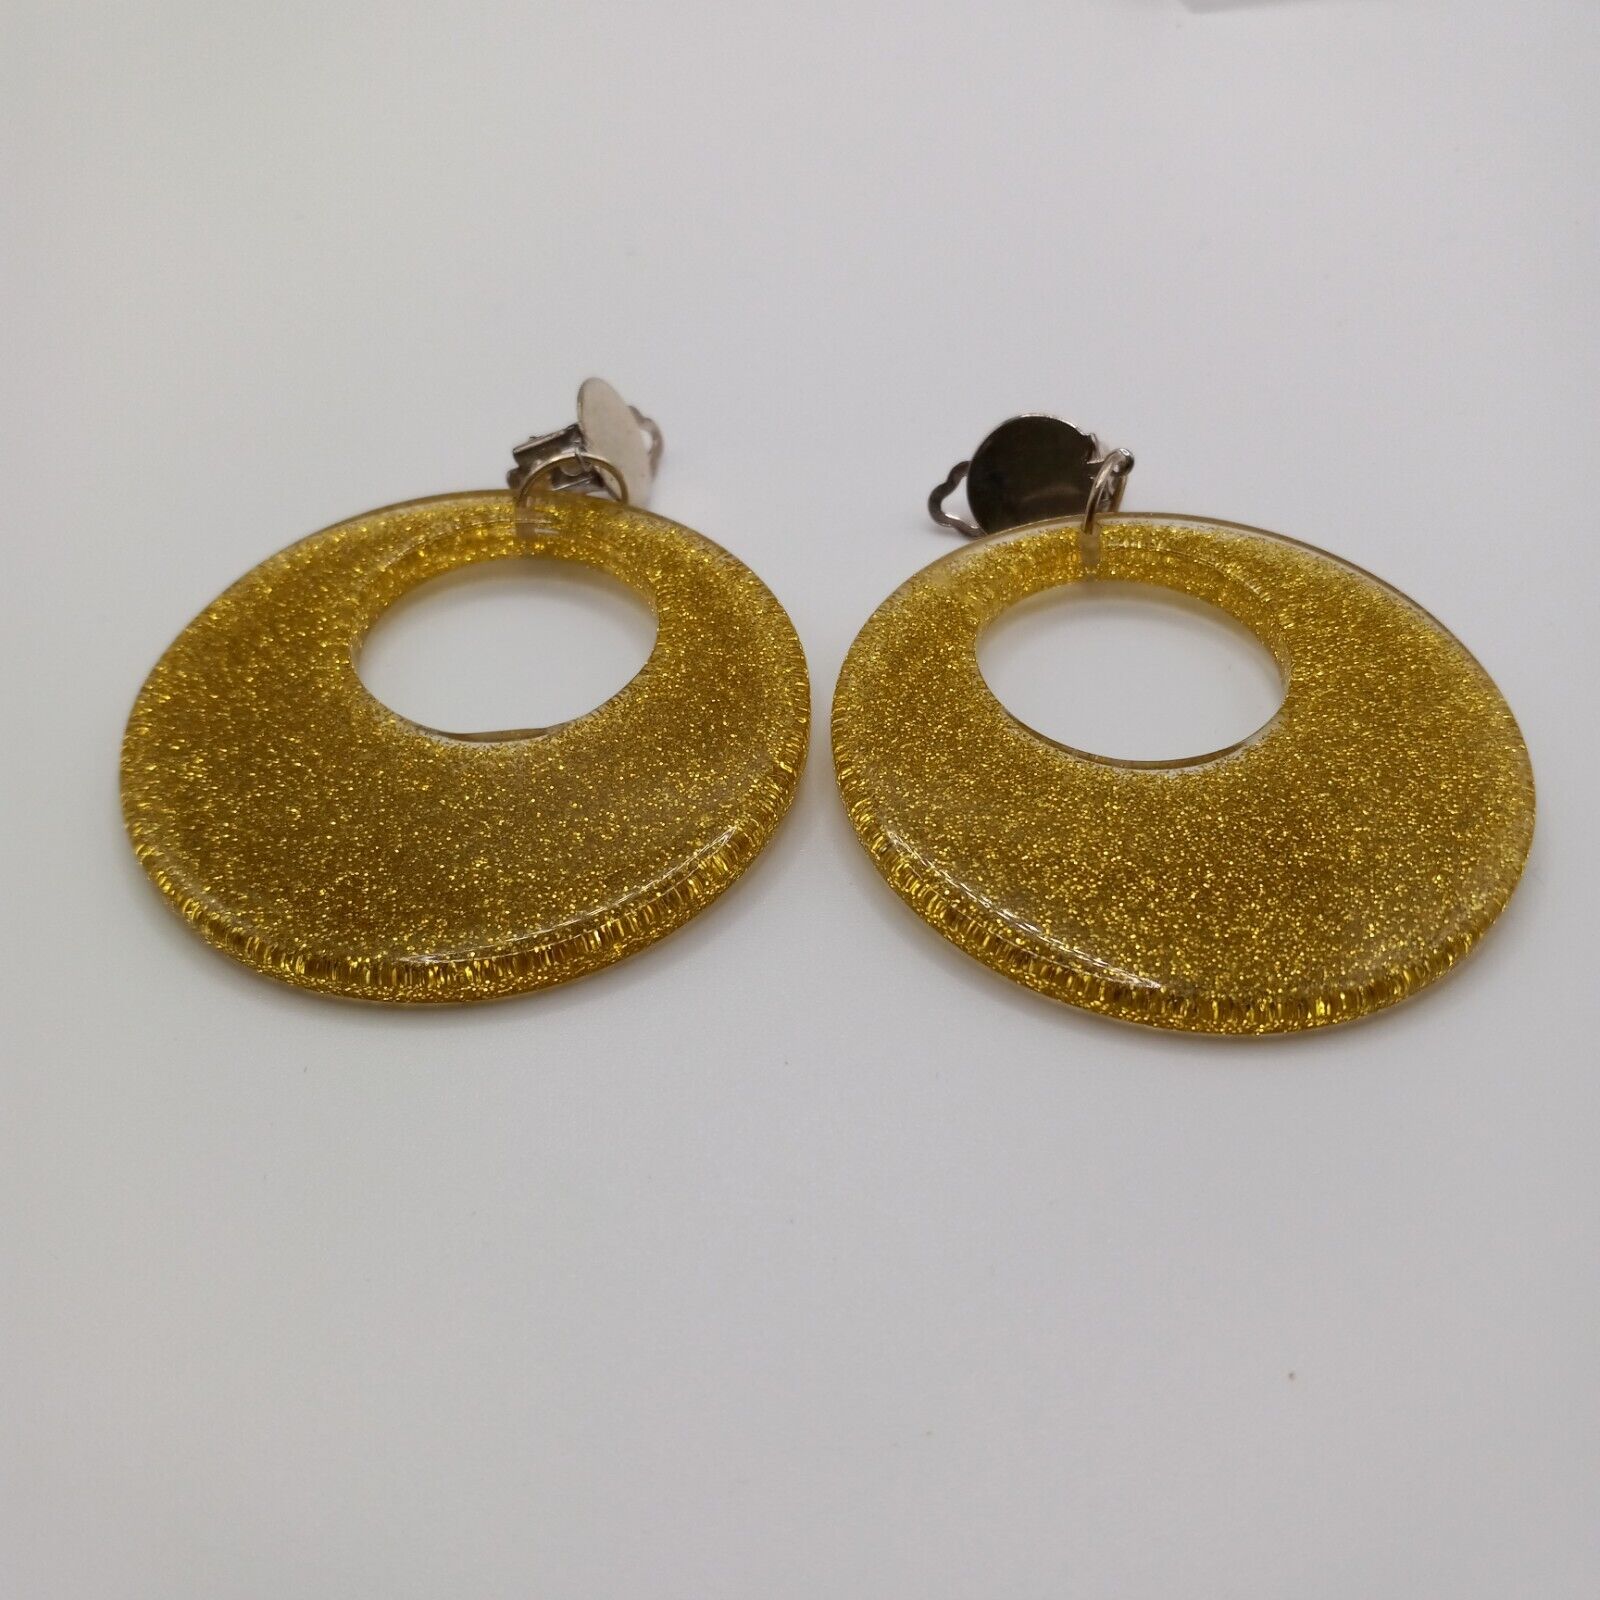 Stunning Vintage 80's Sparkly Gold & Yellow Hoop Statement Earrings. Clip On Fun